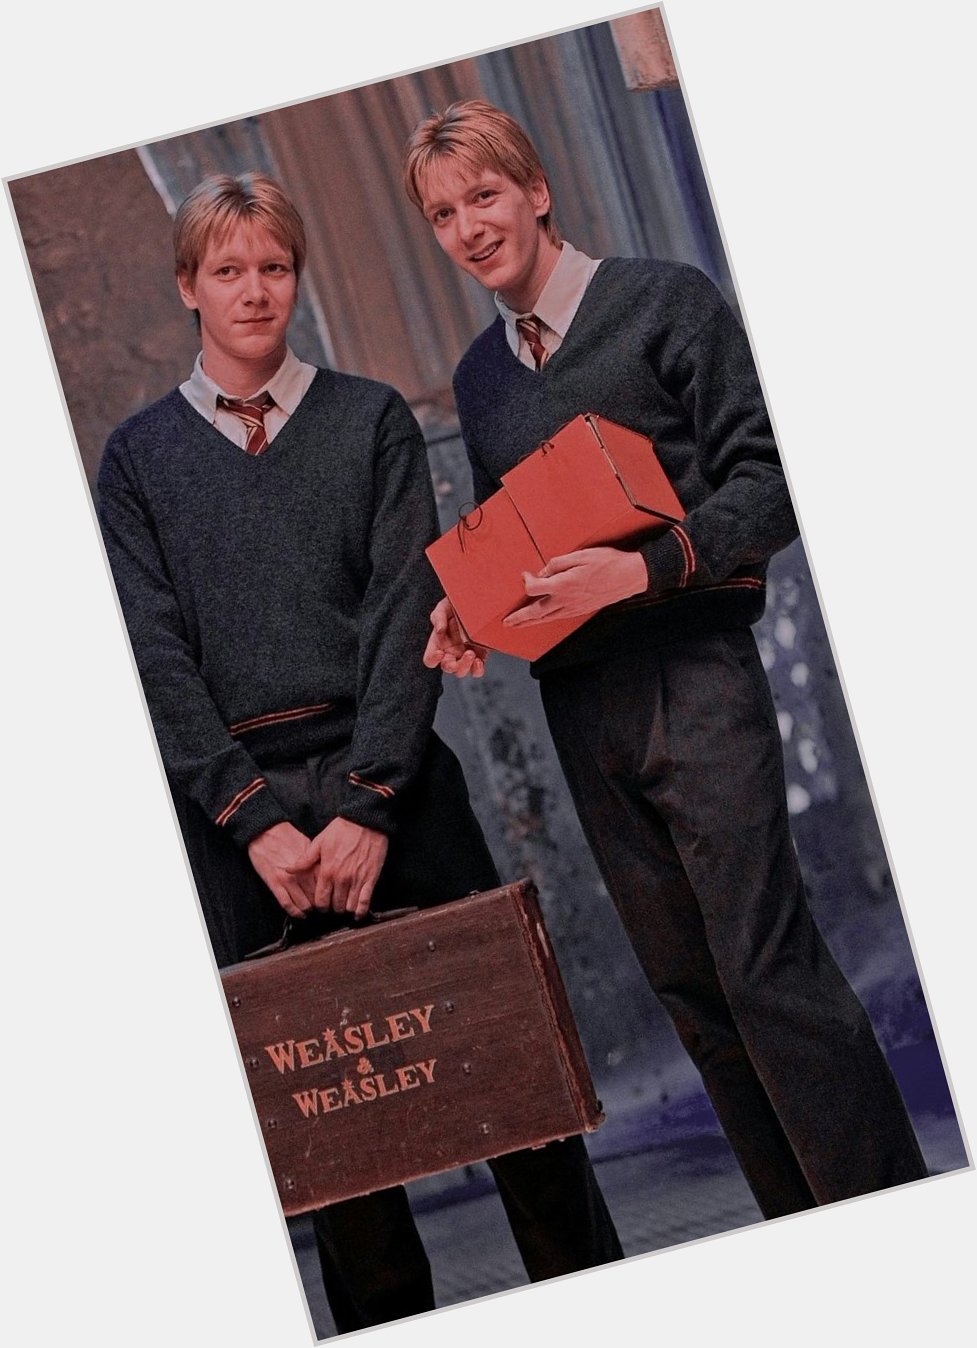  Happy birthday to James and Oliver Phelps who portrayed Fred and George Weasley in the films! 